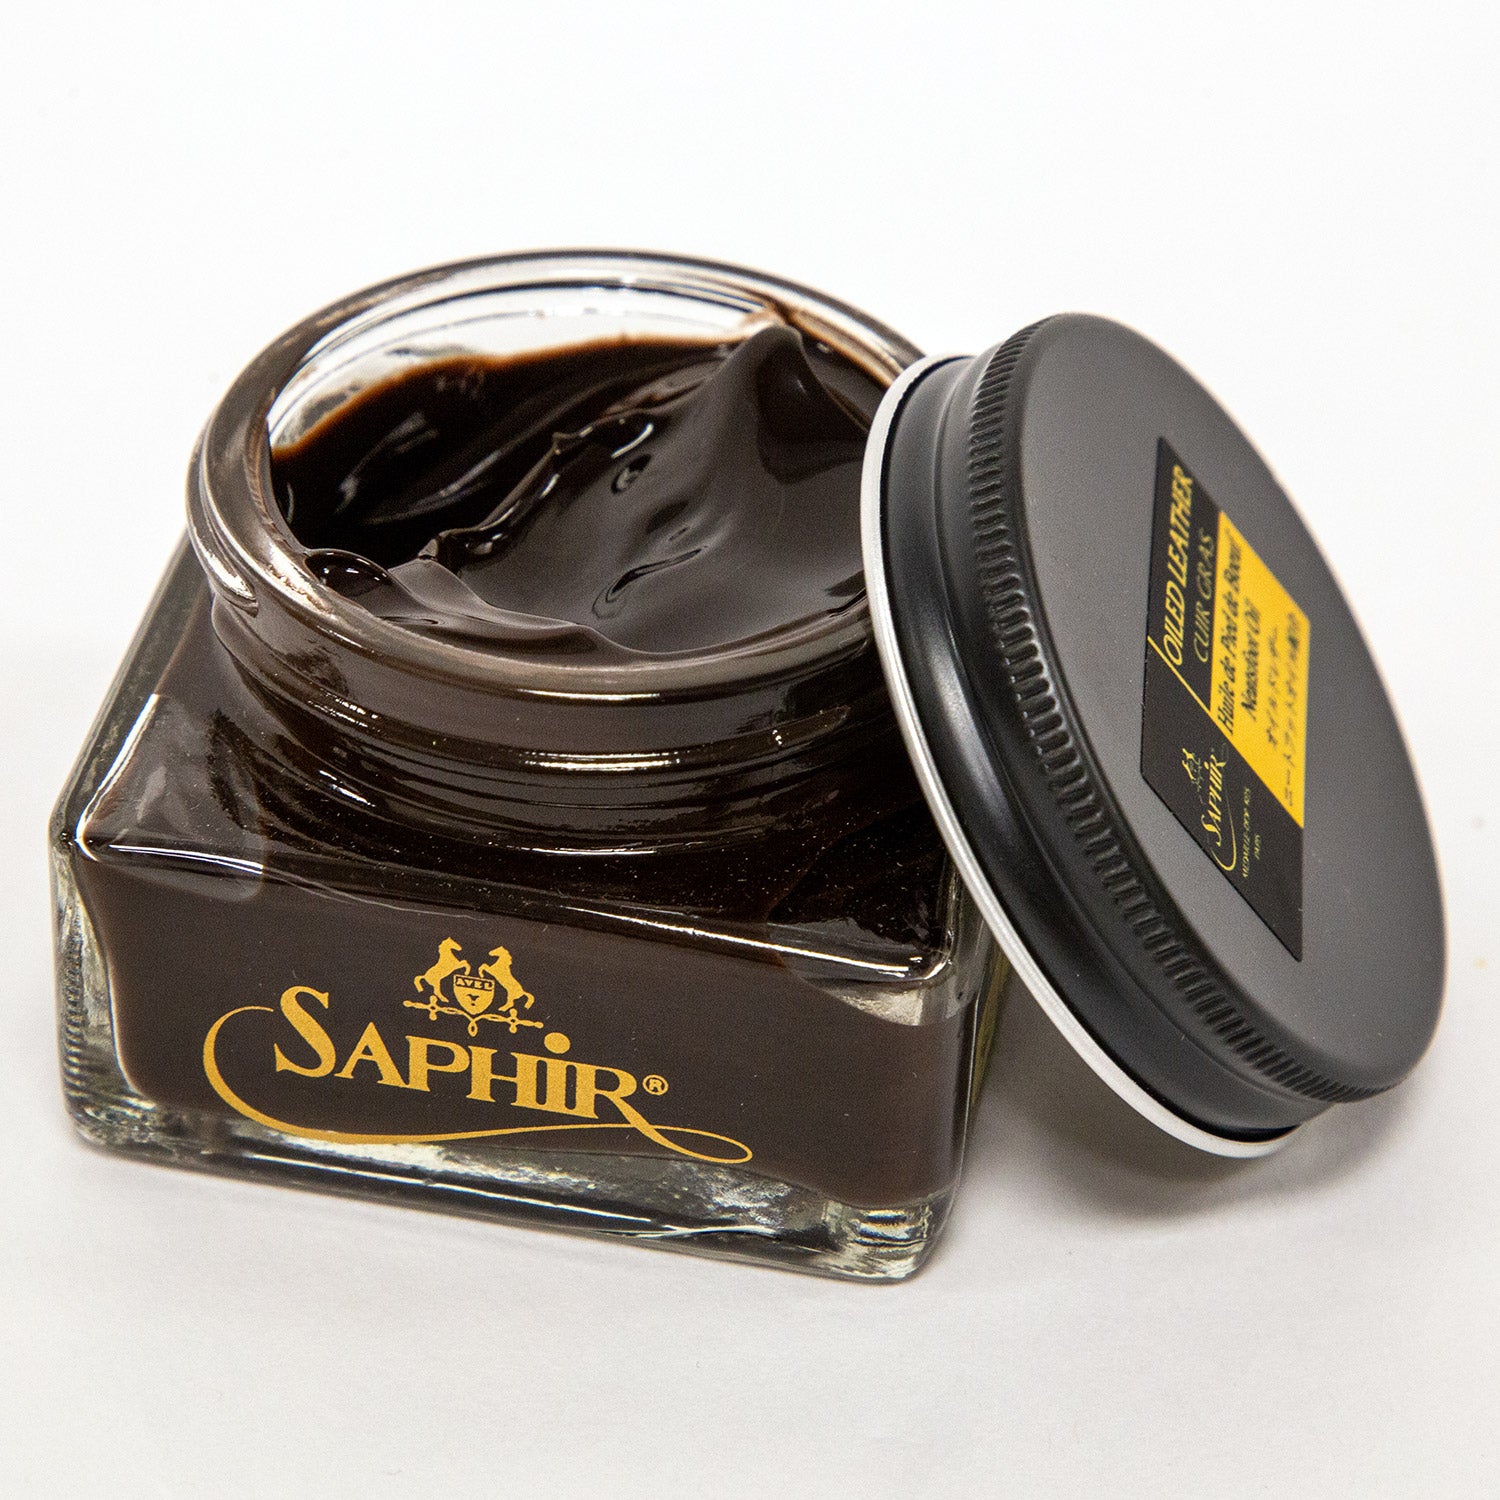 A jar of Saphir Medaille d'Or Oiled Leather Cream for Chromexcel made by KirbyAllison.com in France.